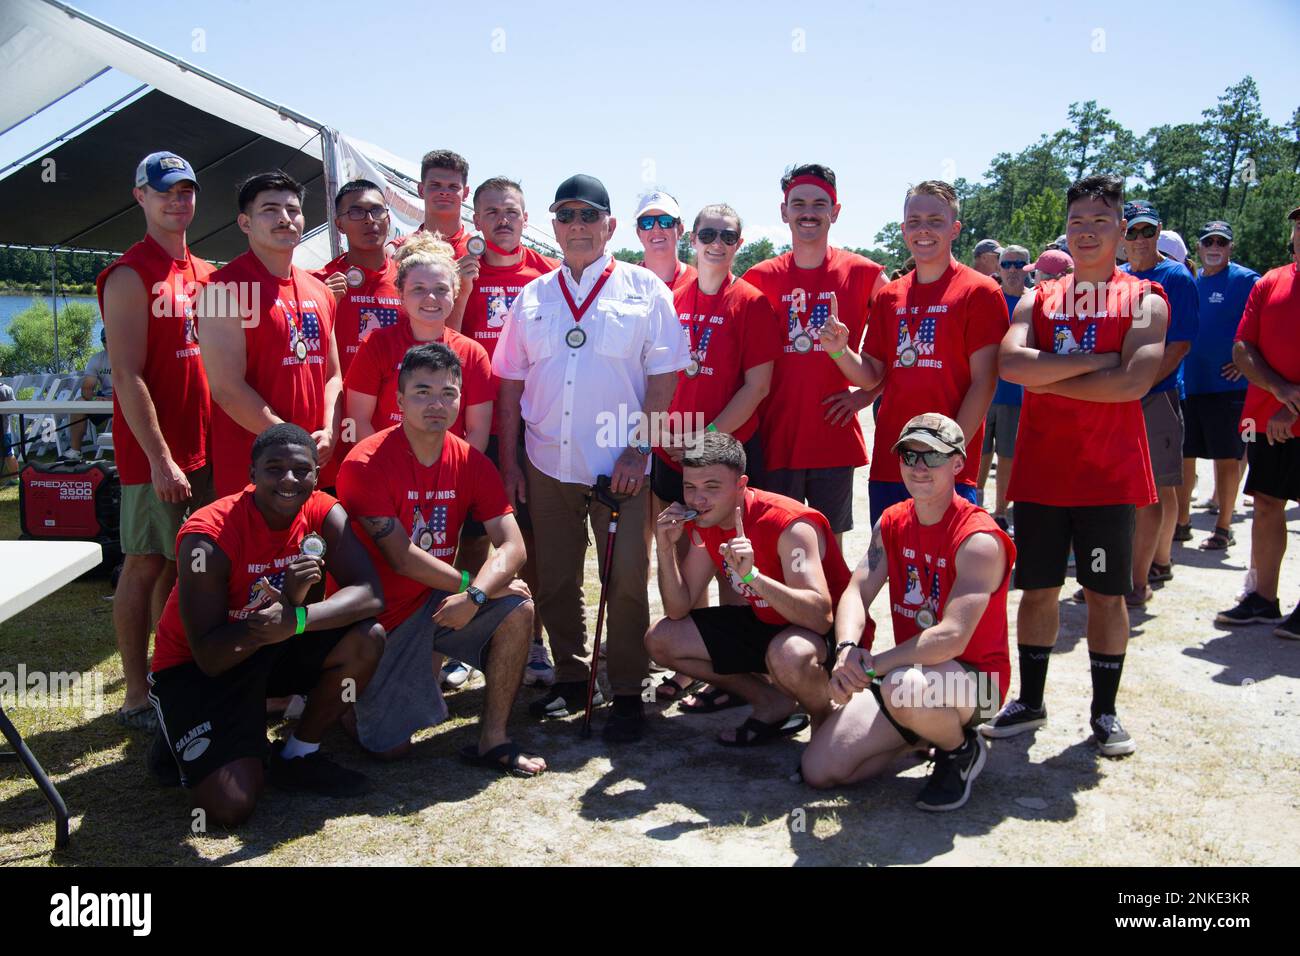 The Neuse Winds Freedom Riders, a paddle team comprised of Marines with the Single Marine Program, take a photo with their sponsor, Dr. John Windrith, during the 12th Annual Dragon Boat Races and Festival in Oriental, North Carolina, Aug. 13, 2022. Windwrith sponsors the Neuse Wind Freedom Riders every year. Stock Photo